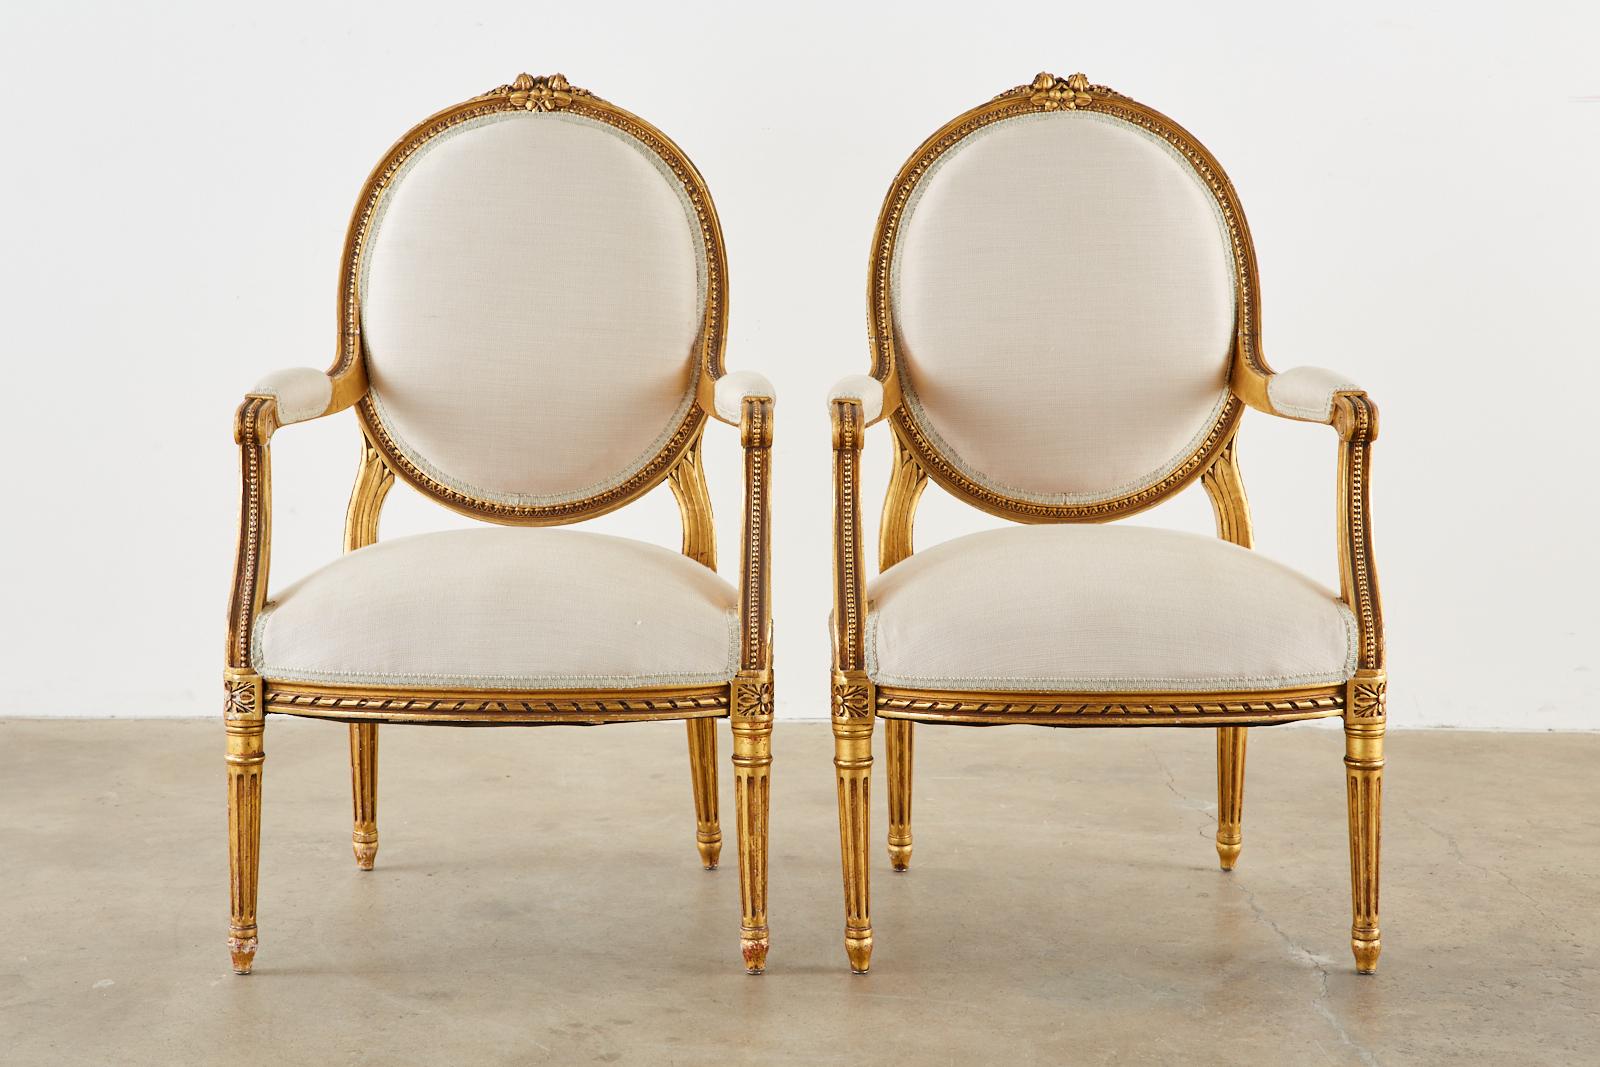 Stunning pair of late 19th century French fauteuil armchairs made in the grand Louis XVI taste. The chairs feature fine, highly carved giltwood frames embellished with rope, bead, and rosette decoration and topped with floral ribbon crests on the